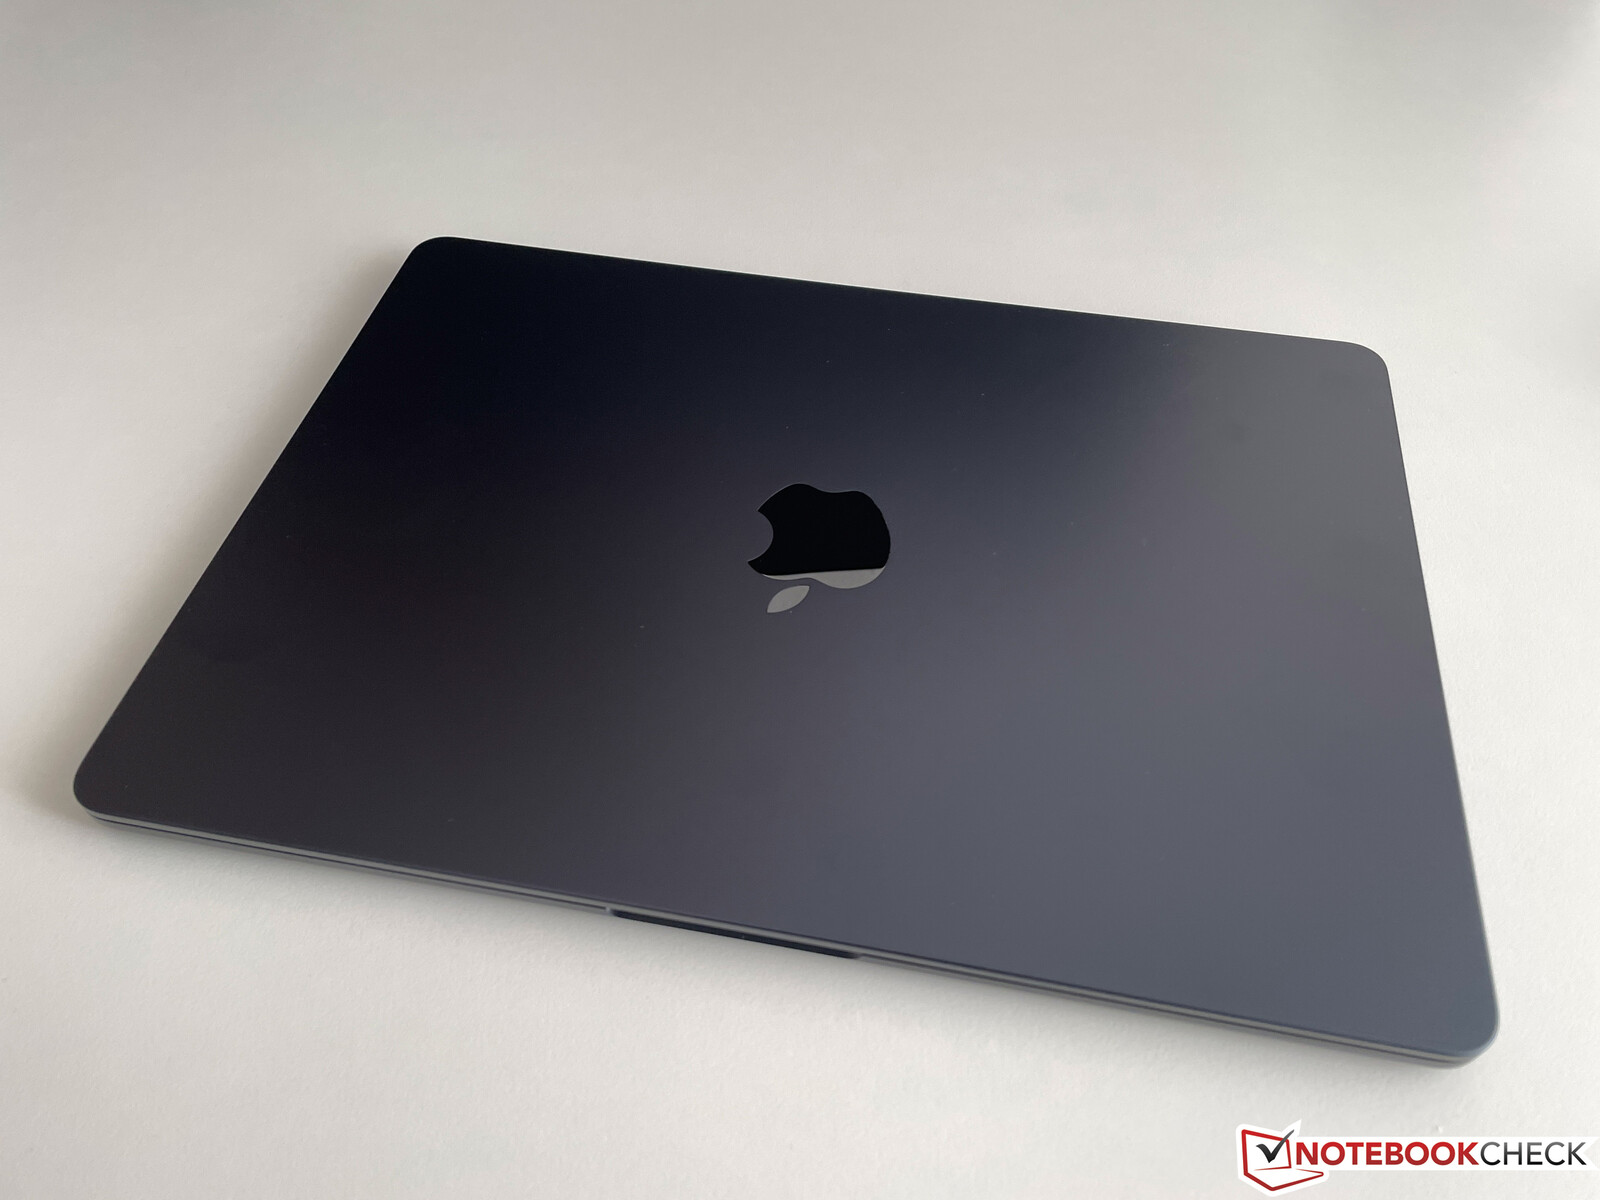 M2 MacBook Air Review: Appealing Inside and Out